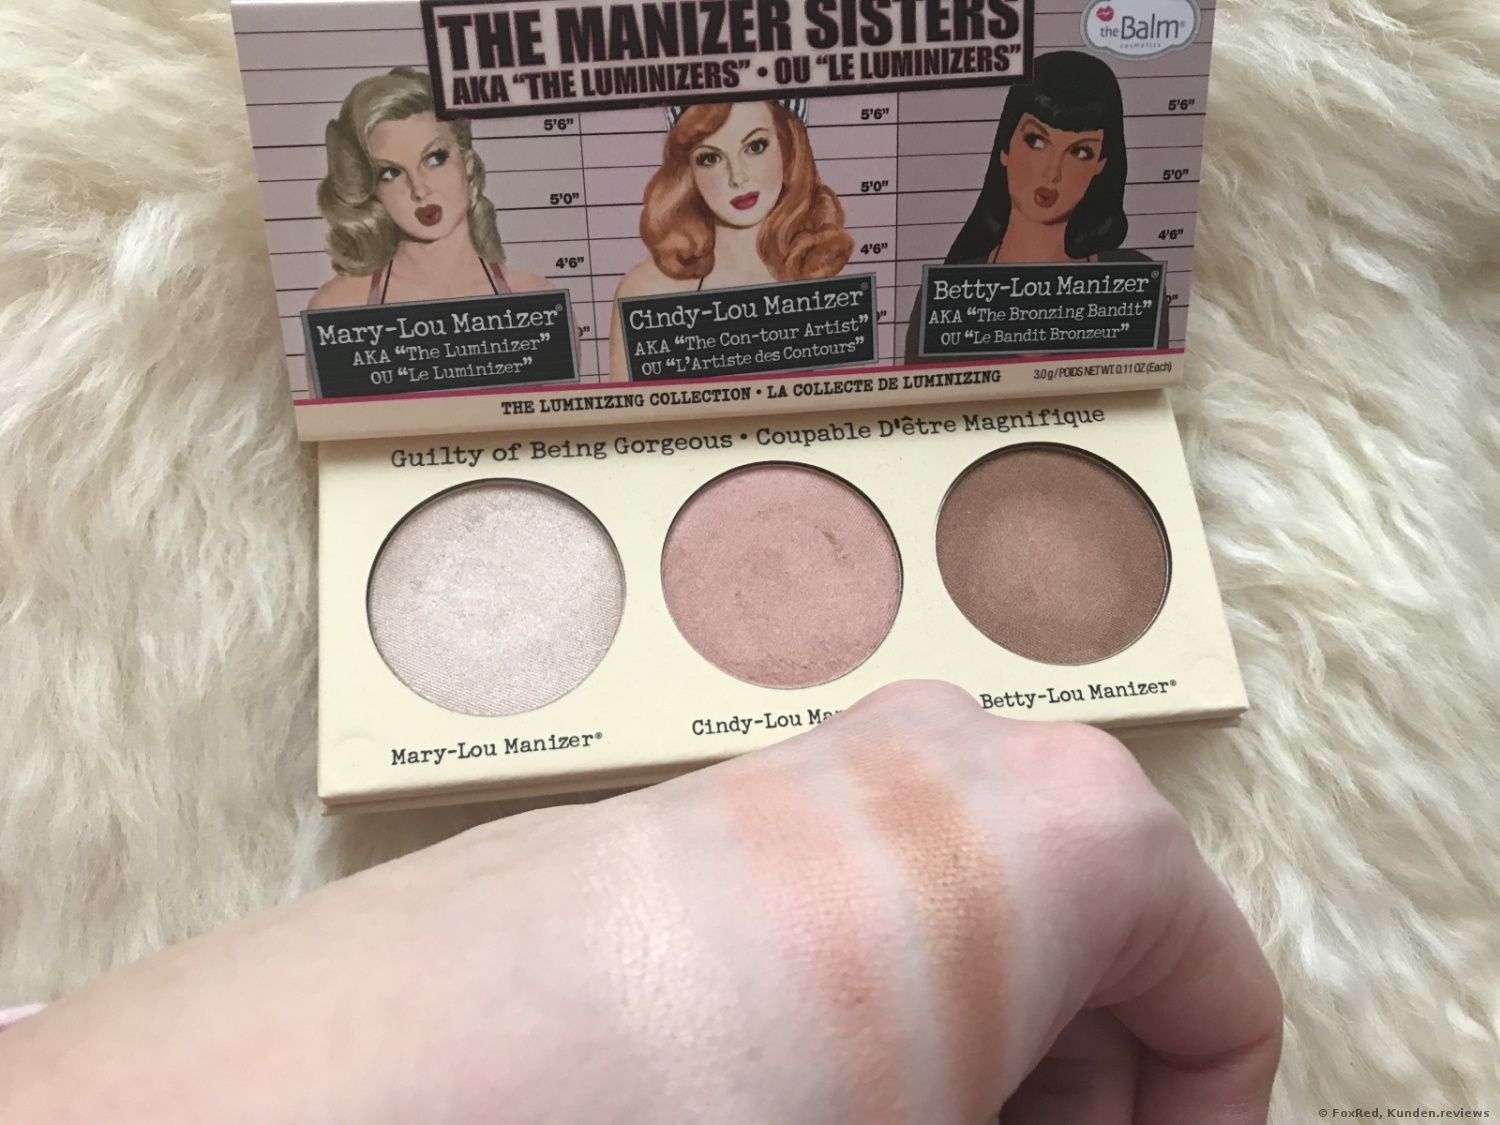 the Balm Highlighter The Manizer Sisters